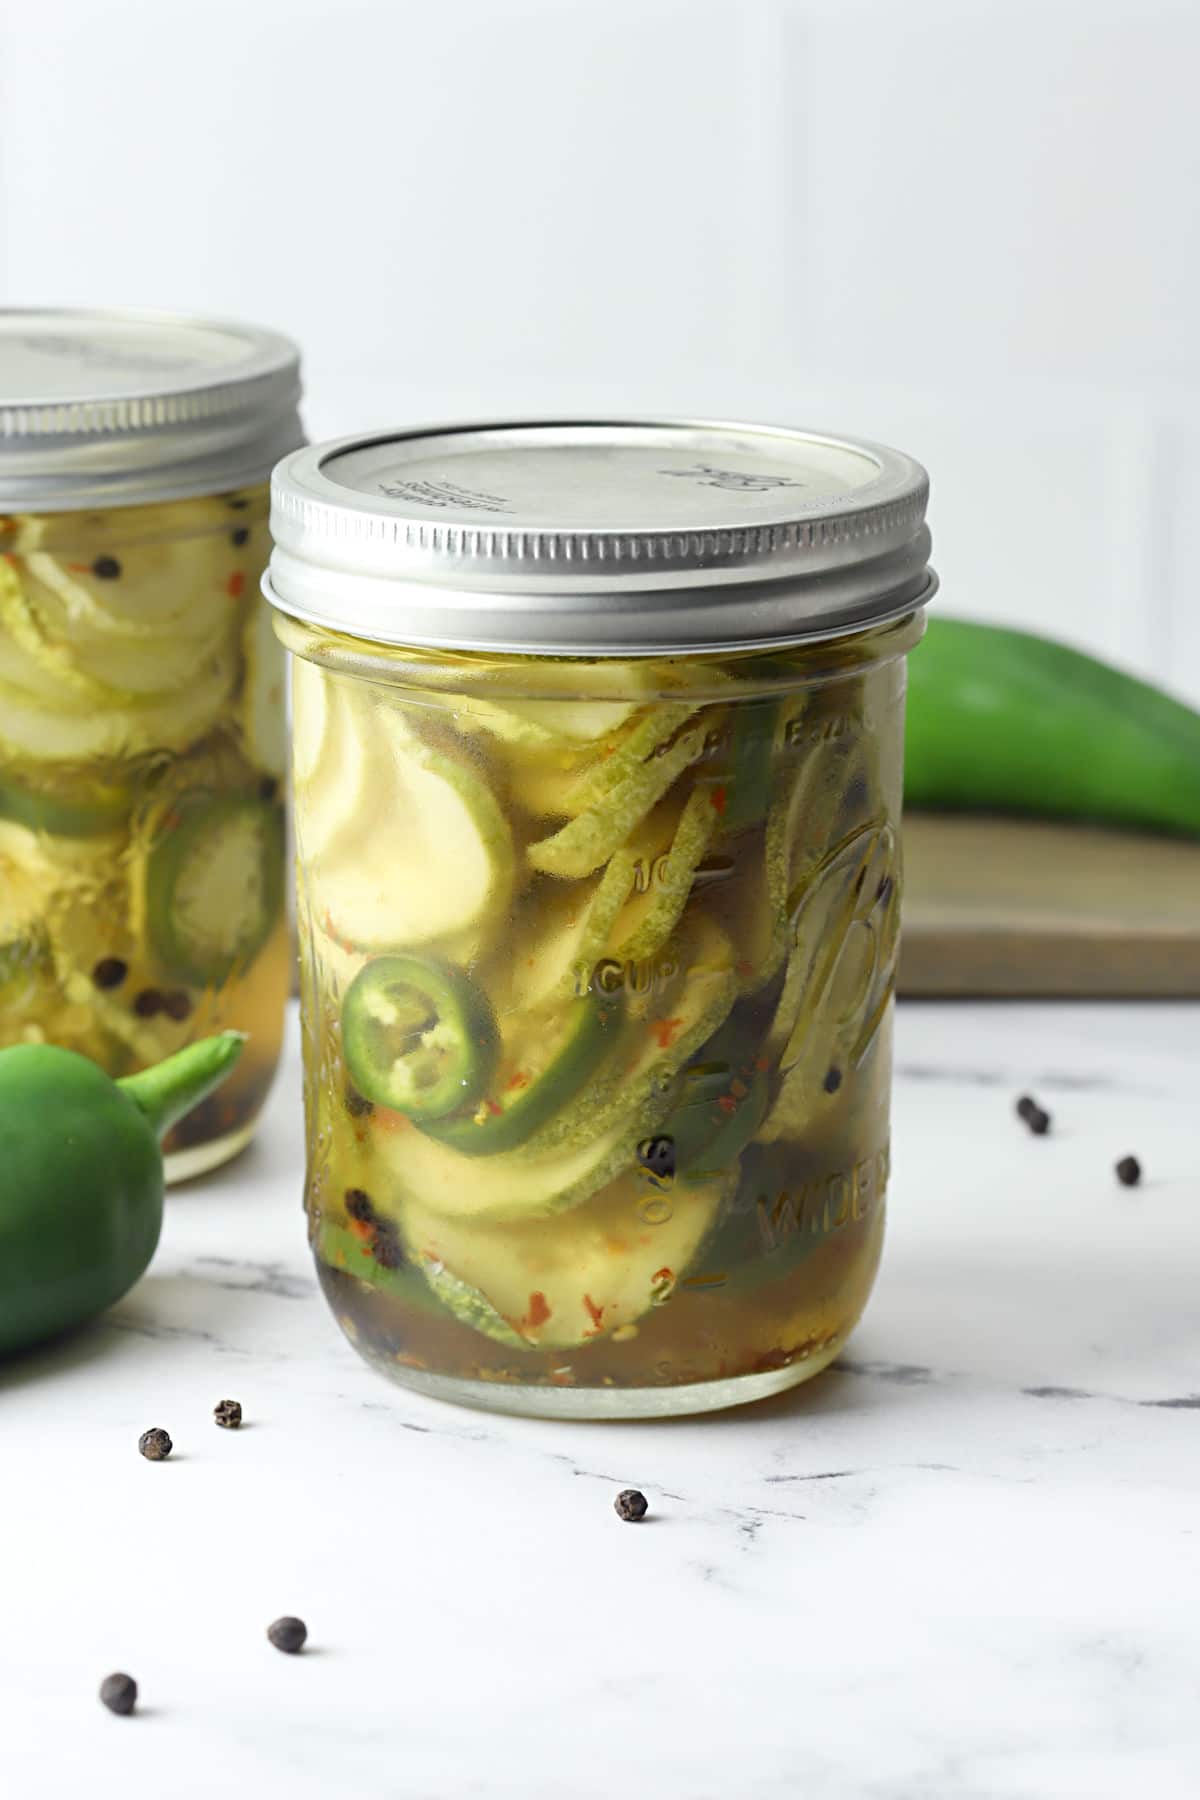 A glass jar filled with sweet and spicy pickles and jalapeno slices.